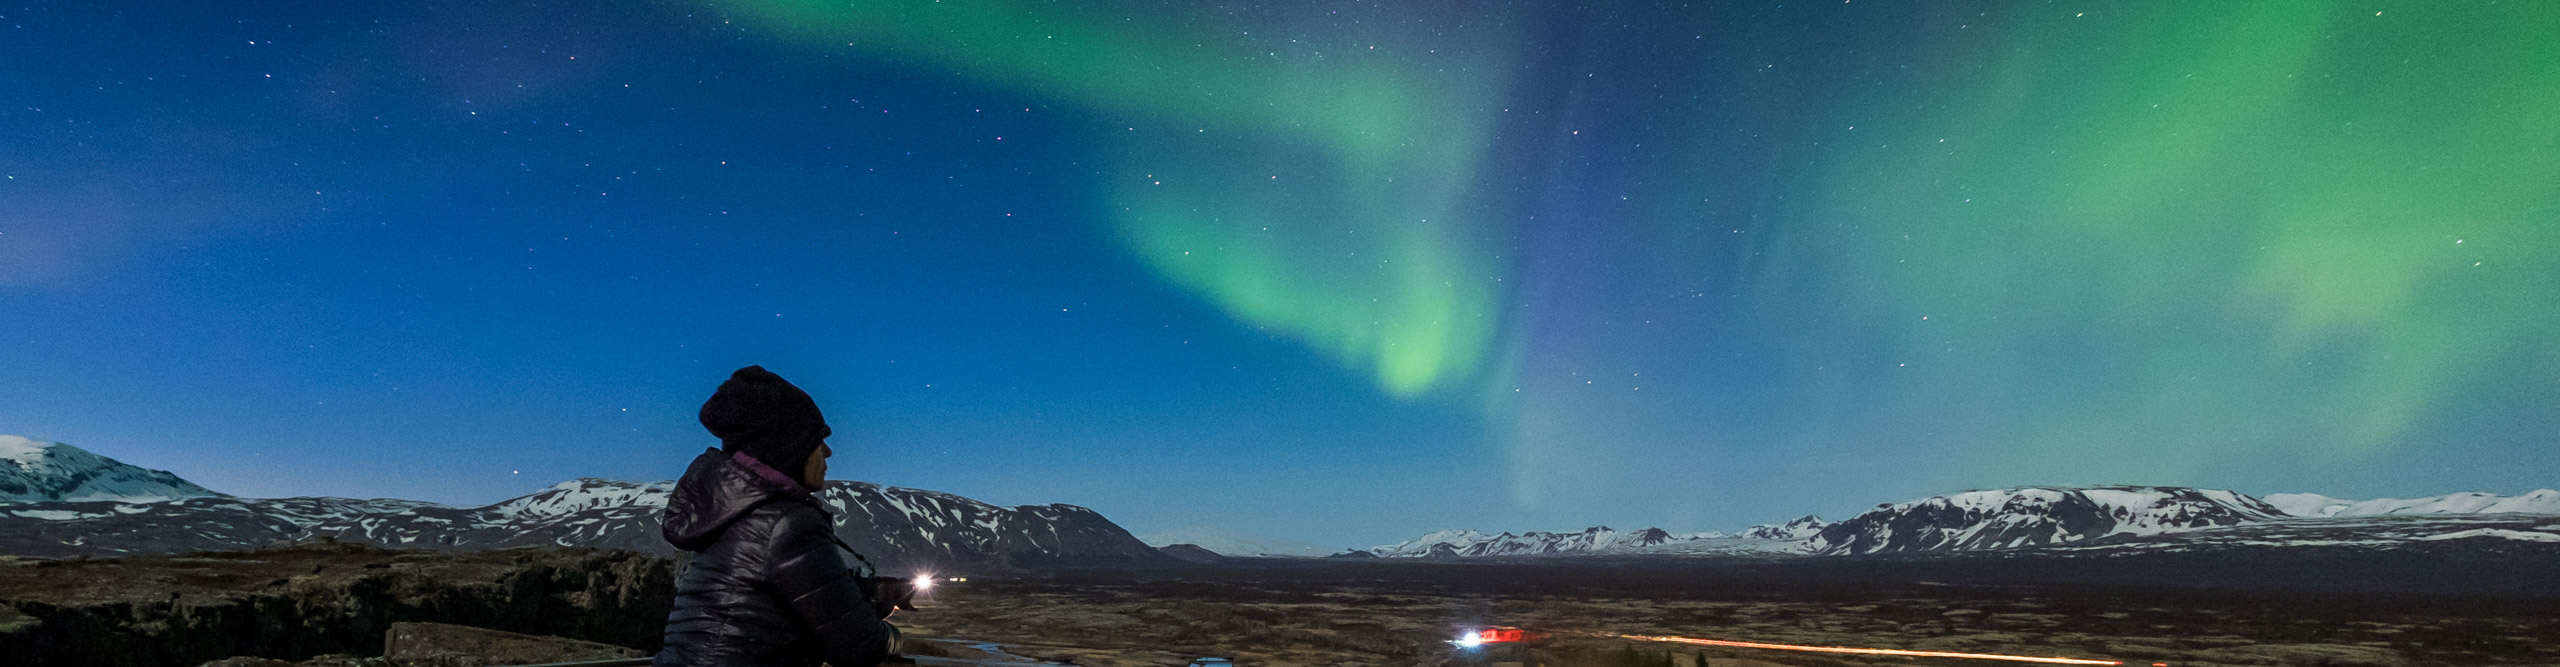 Traveller looks out at Northern Lights in Thingvellier National Park in Iceland